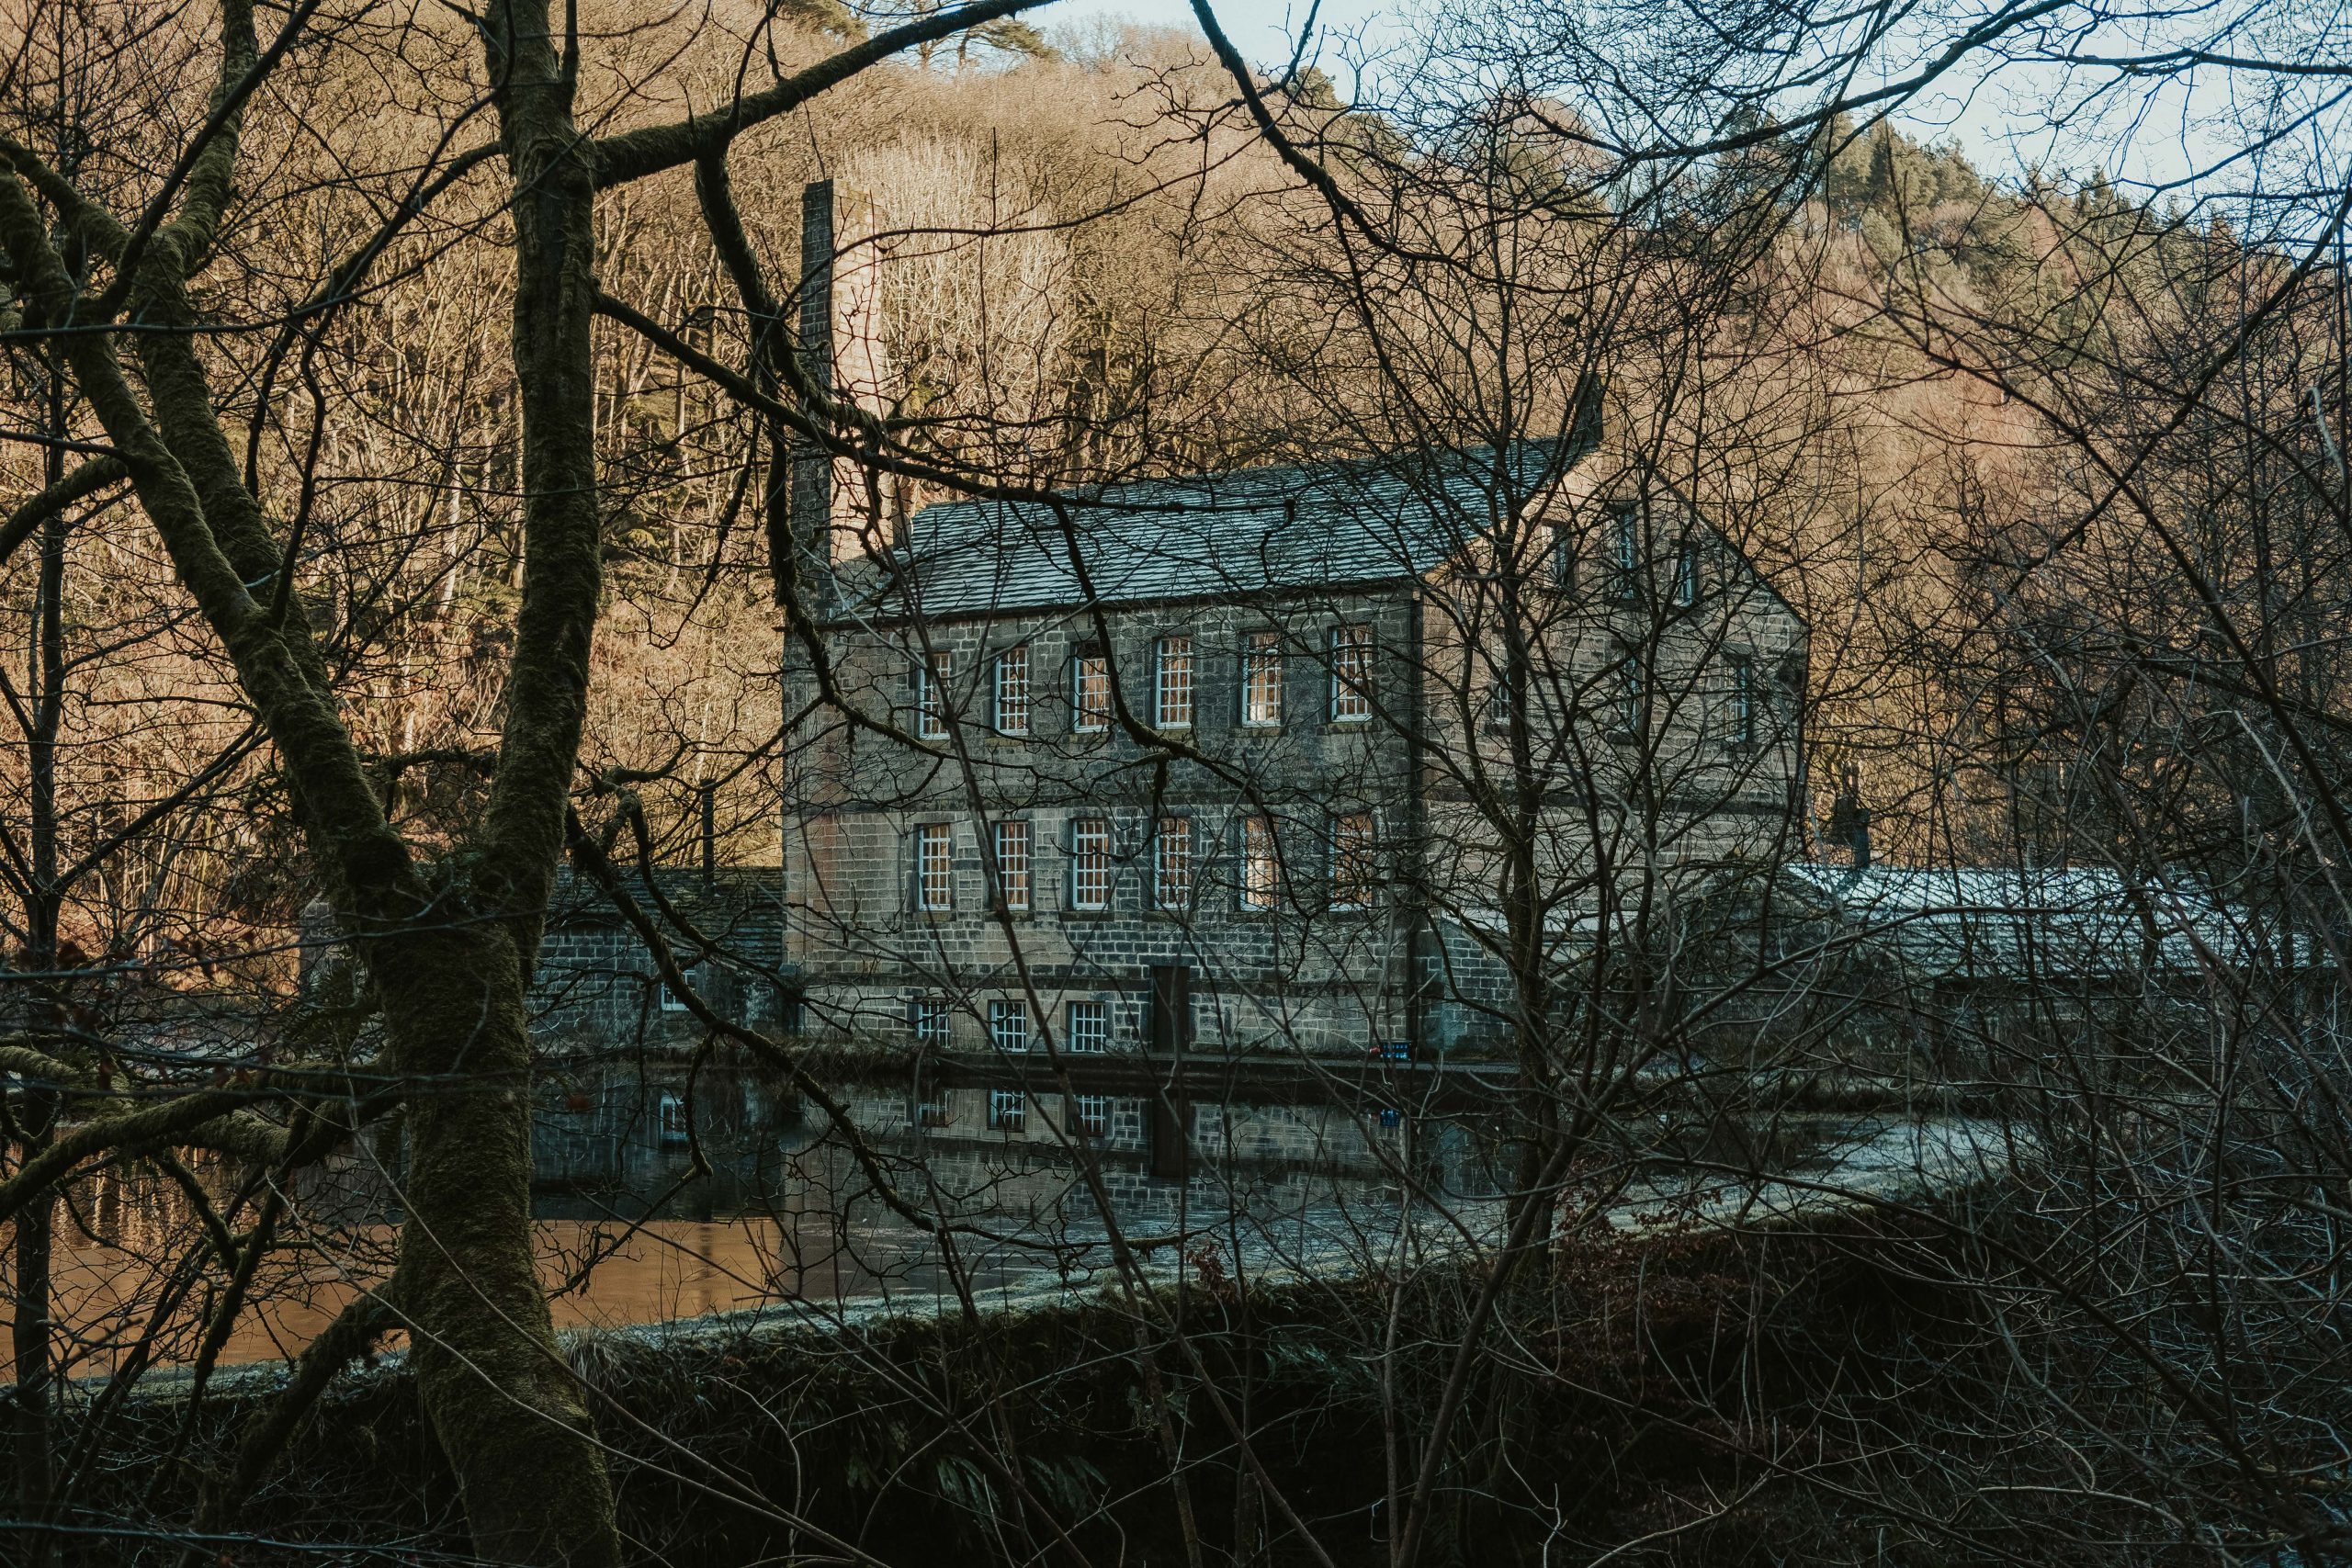 Hebden Bridge mill surrounded by trees in the middle of the winter